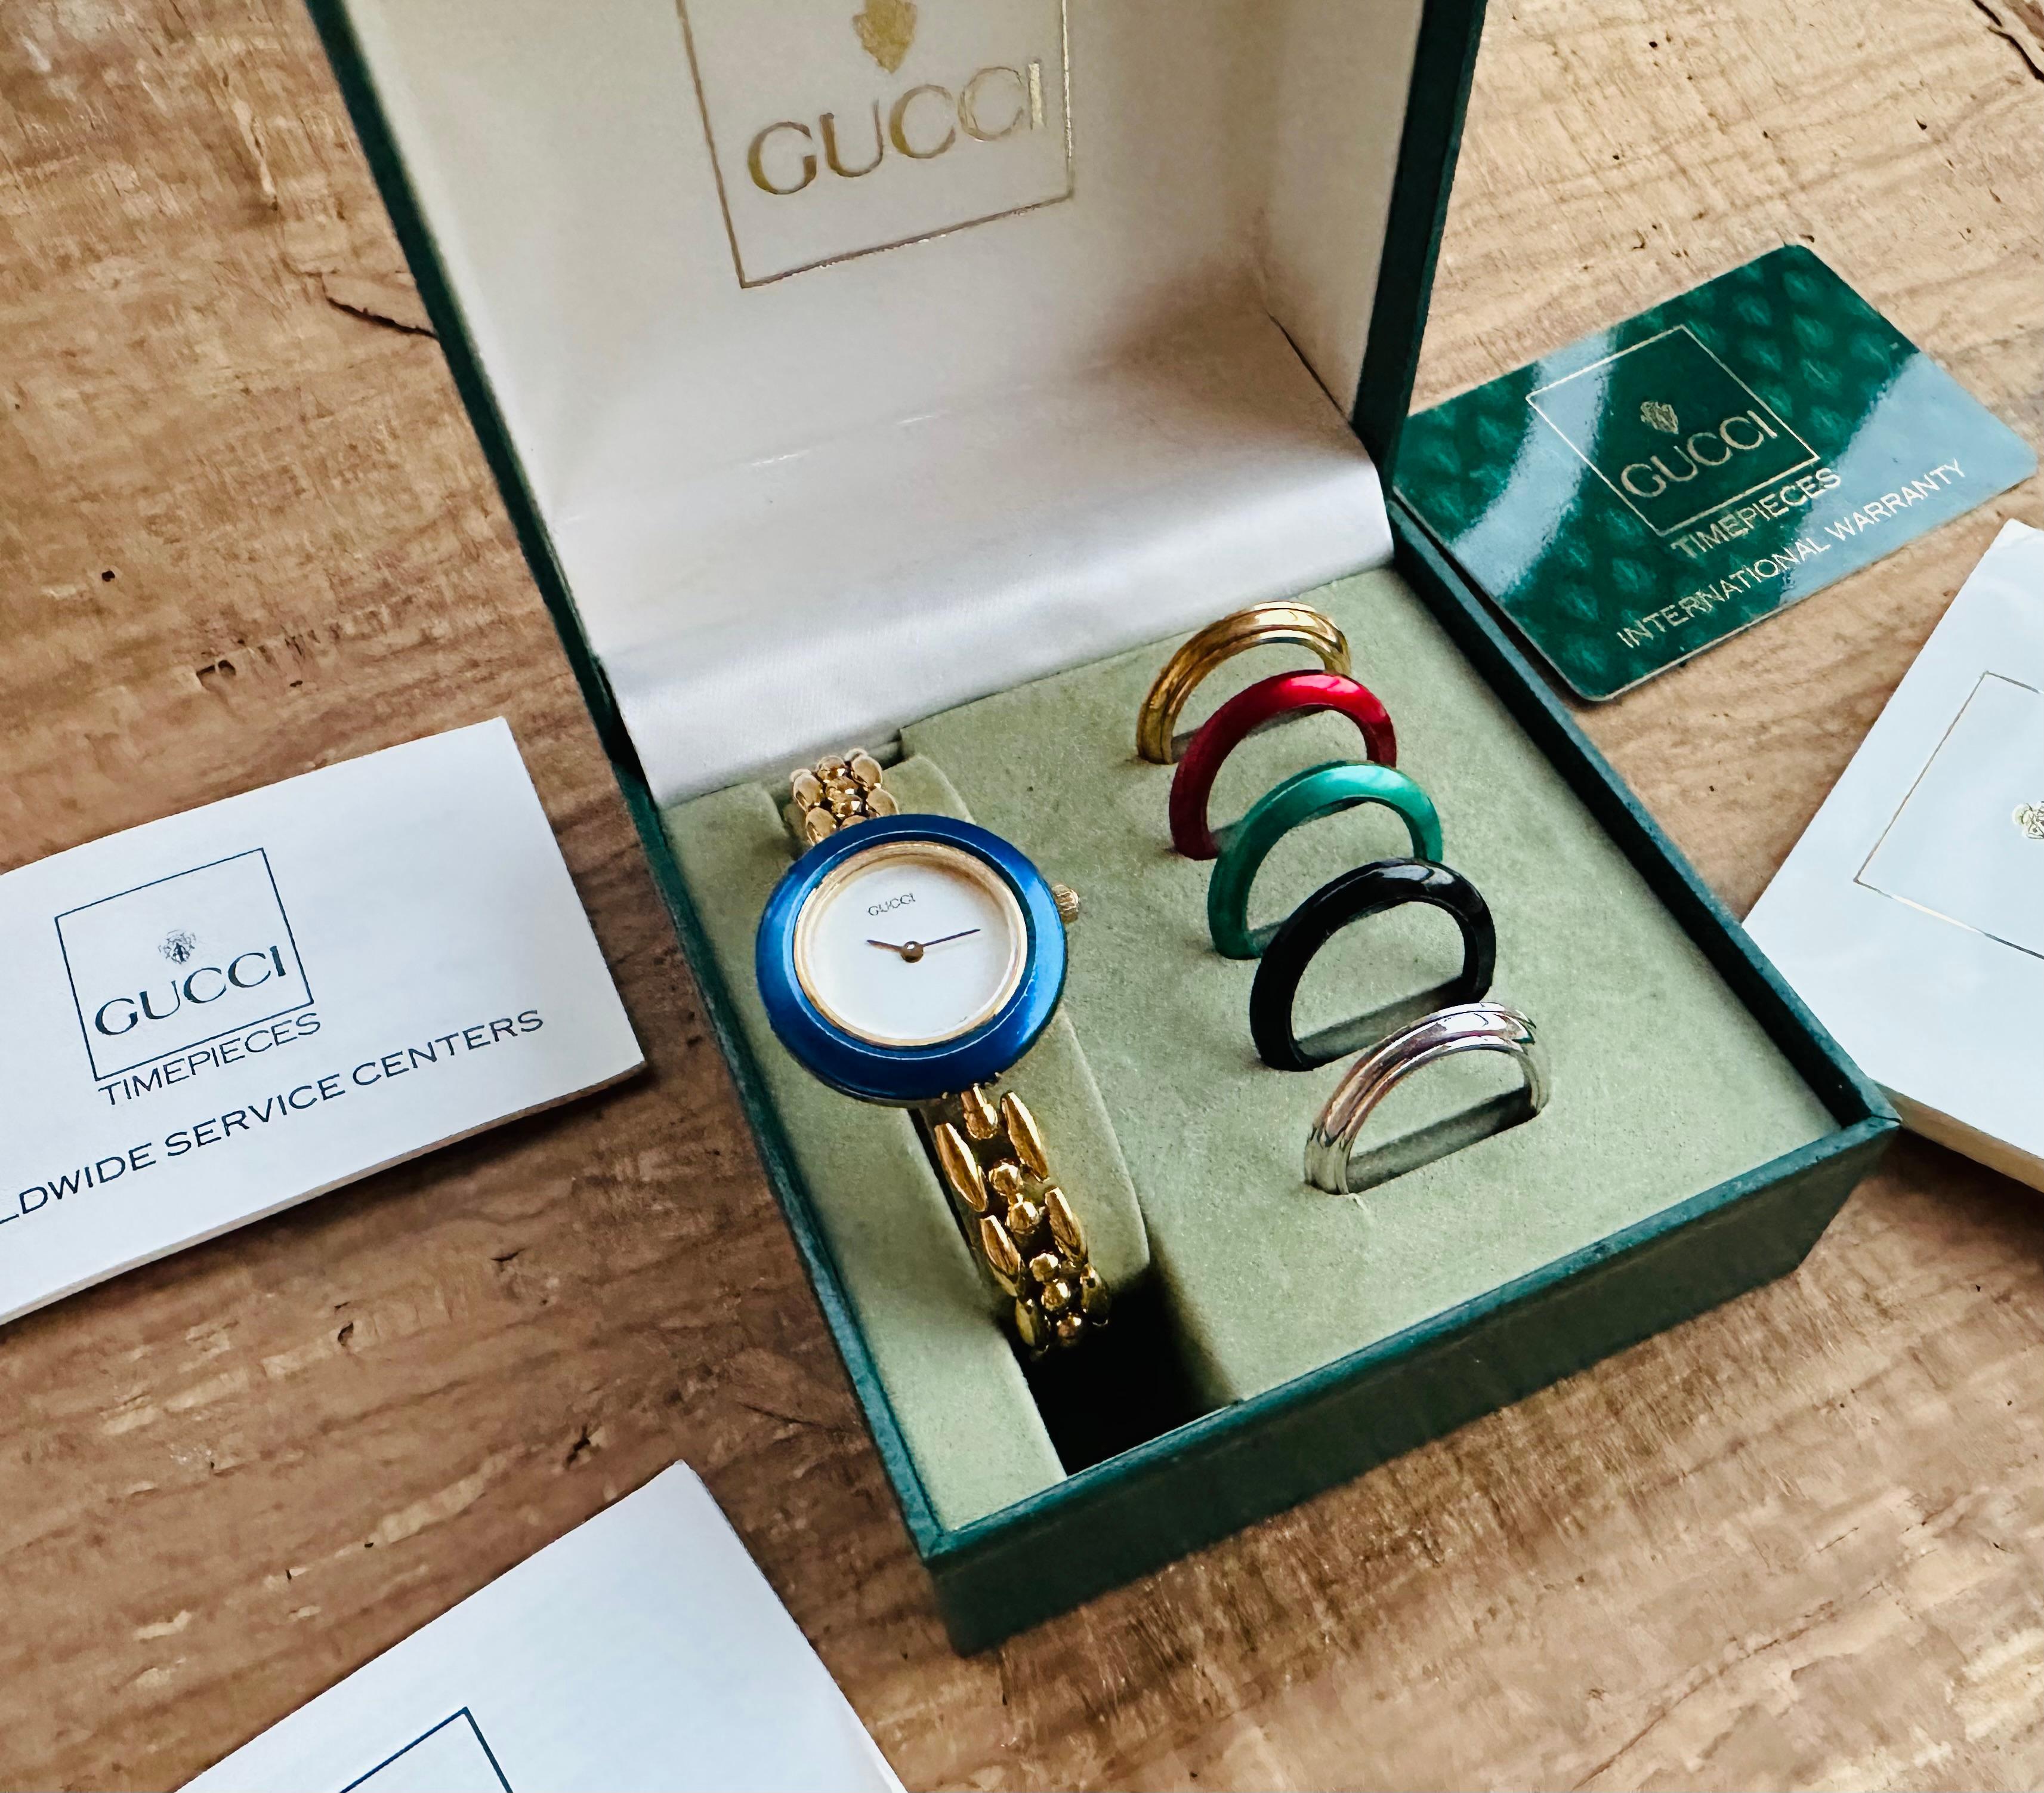 Gucci 11/12.2 Ladies Bangle Watch with Interchangeable Bezels Full Set 2